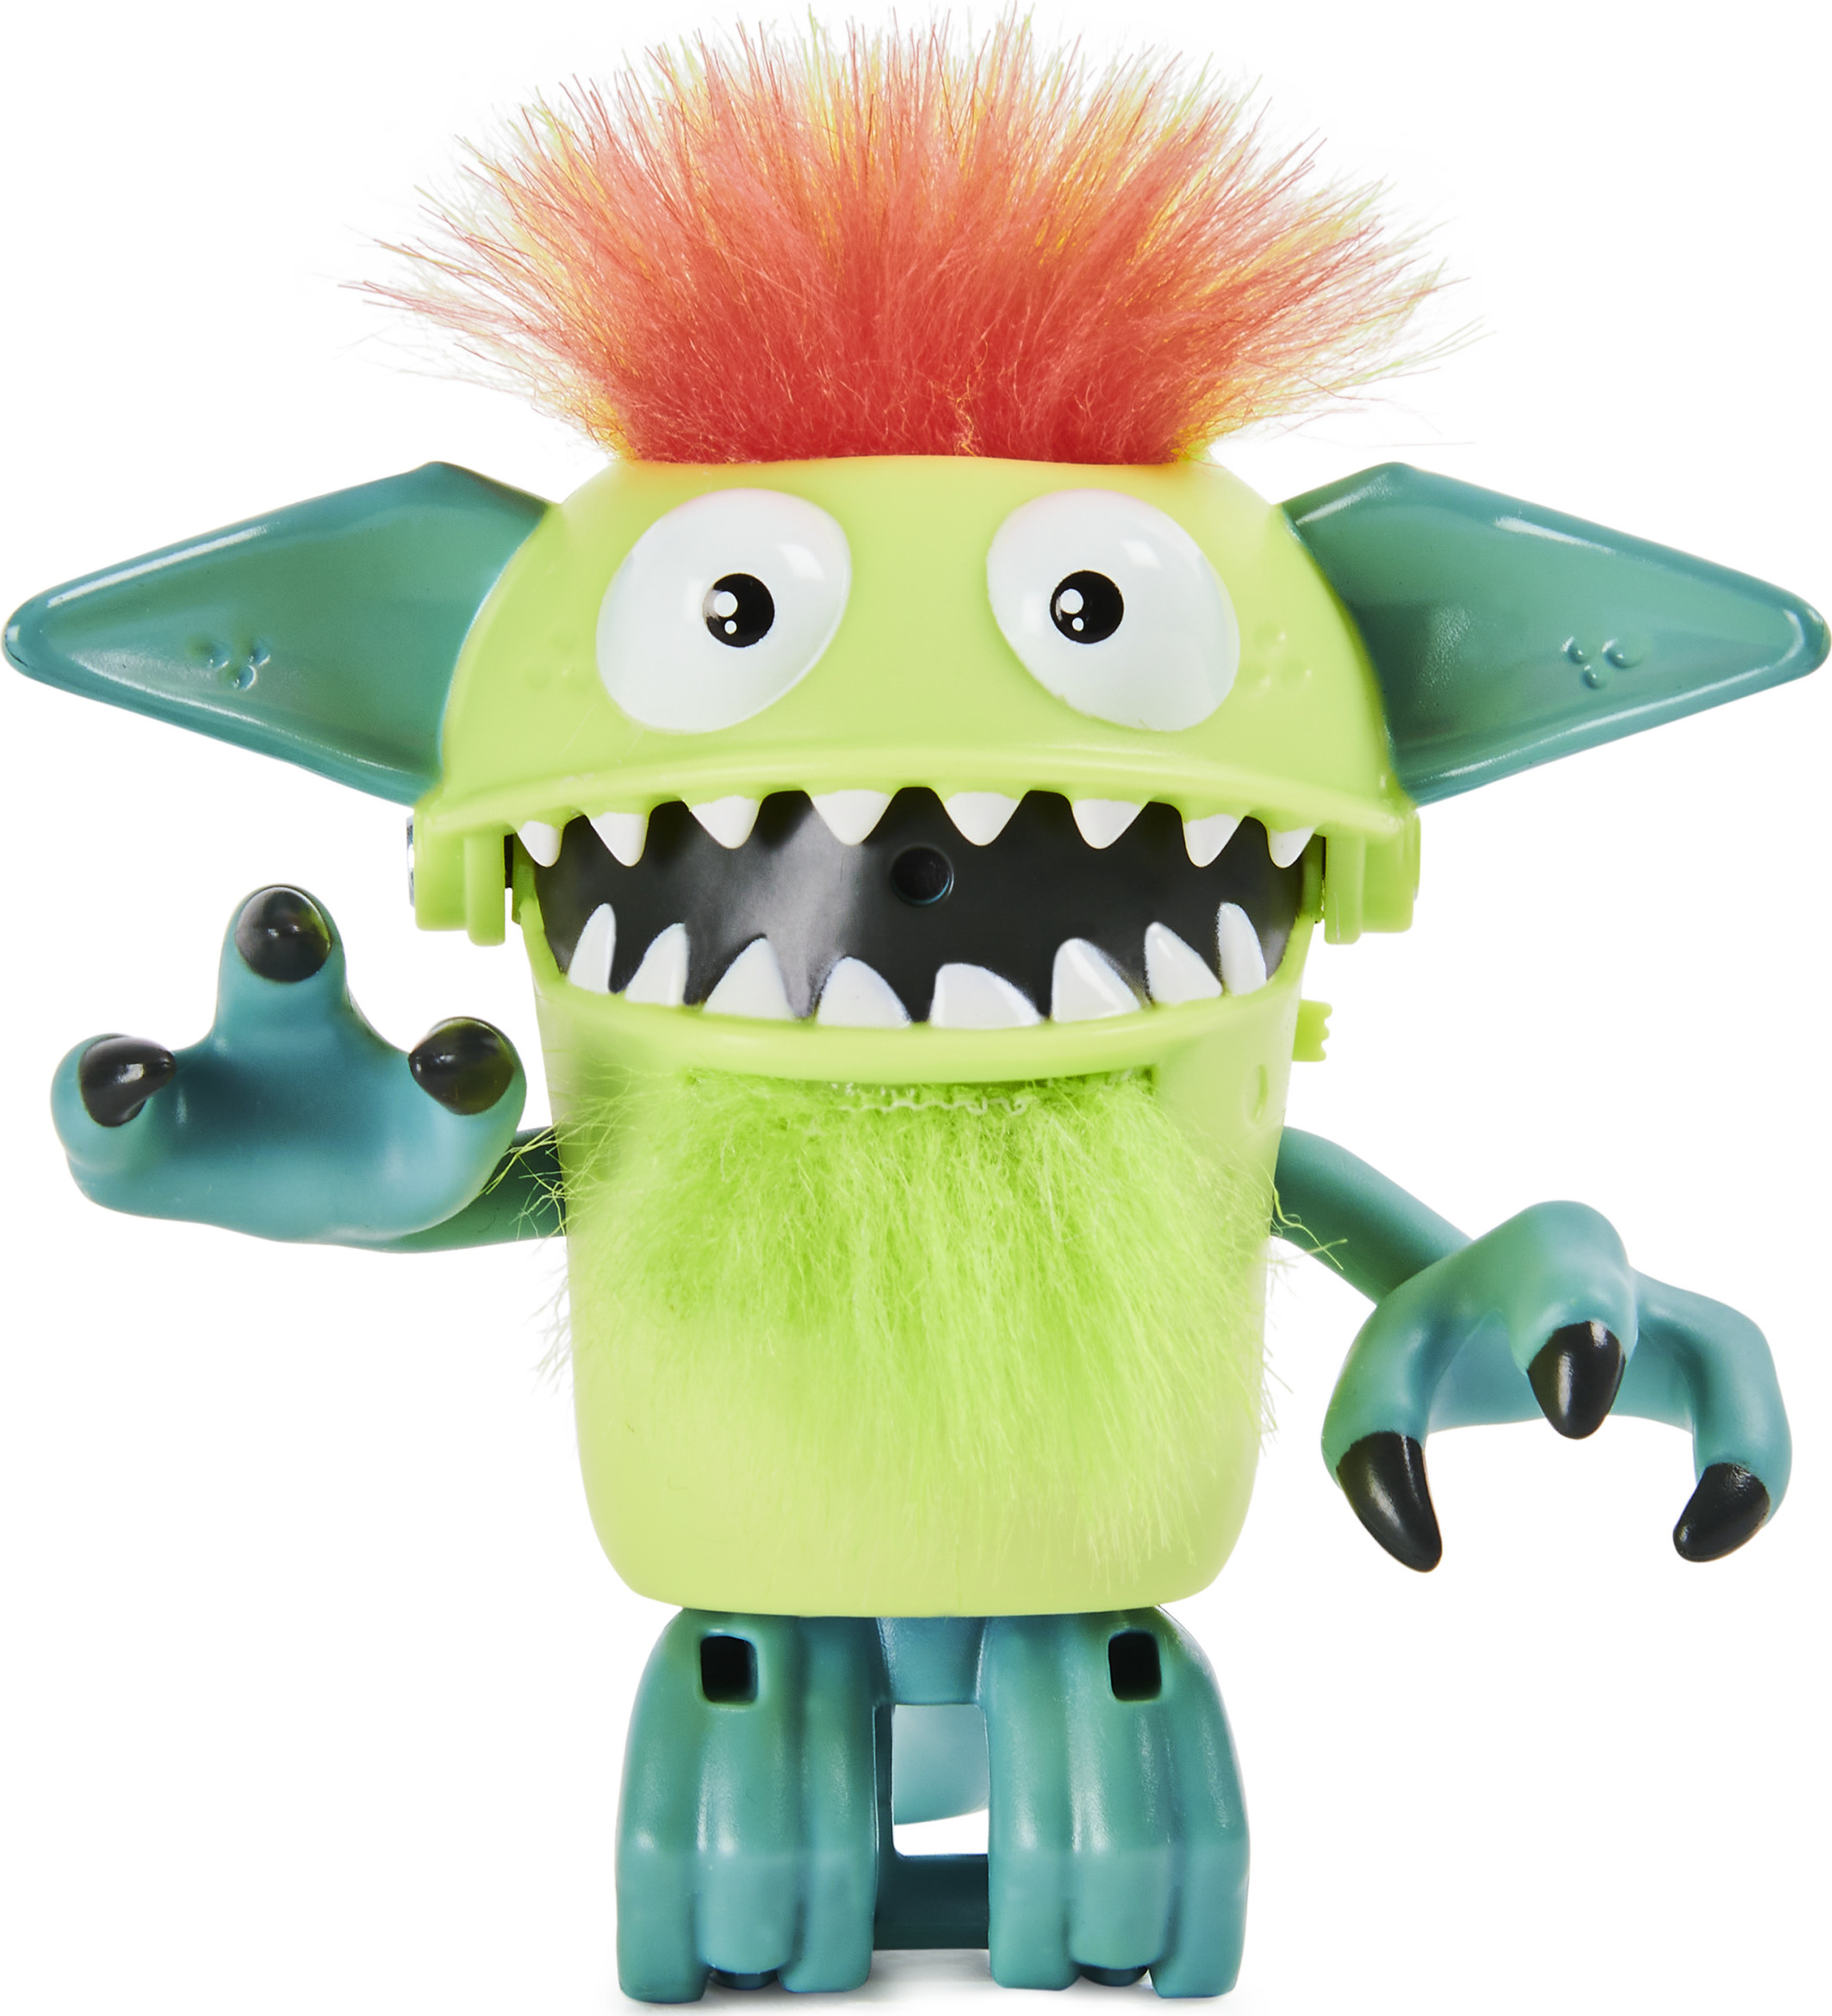 Scritterz, Scabz Interactive Collectible Jungle Creature Toy with Sounds and Movement, for Kids Aged 5 and up - image 1 of 10